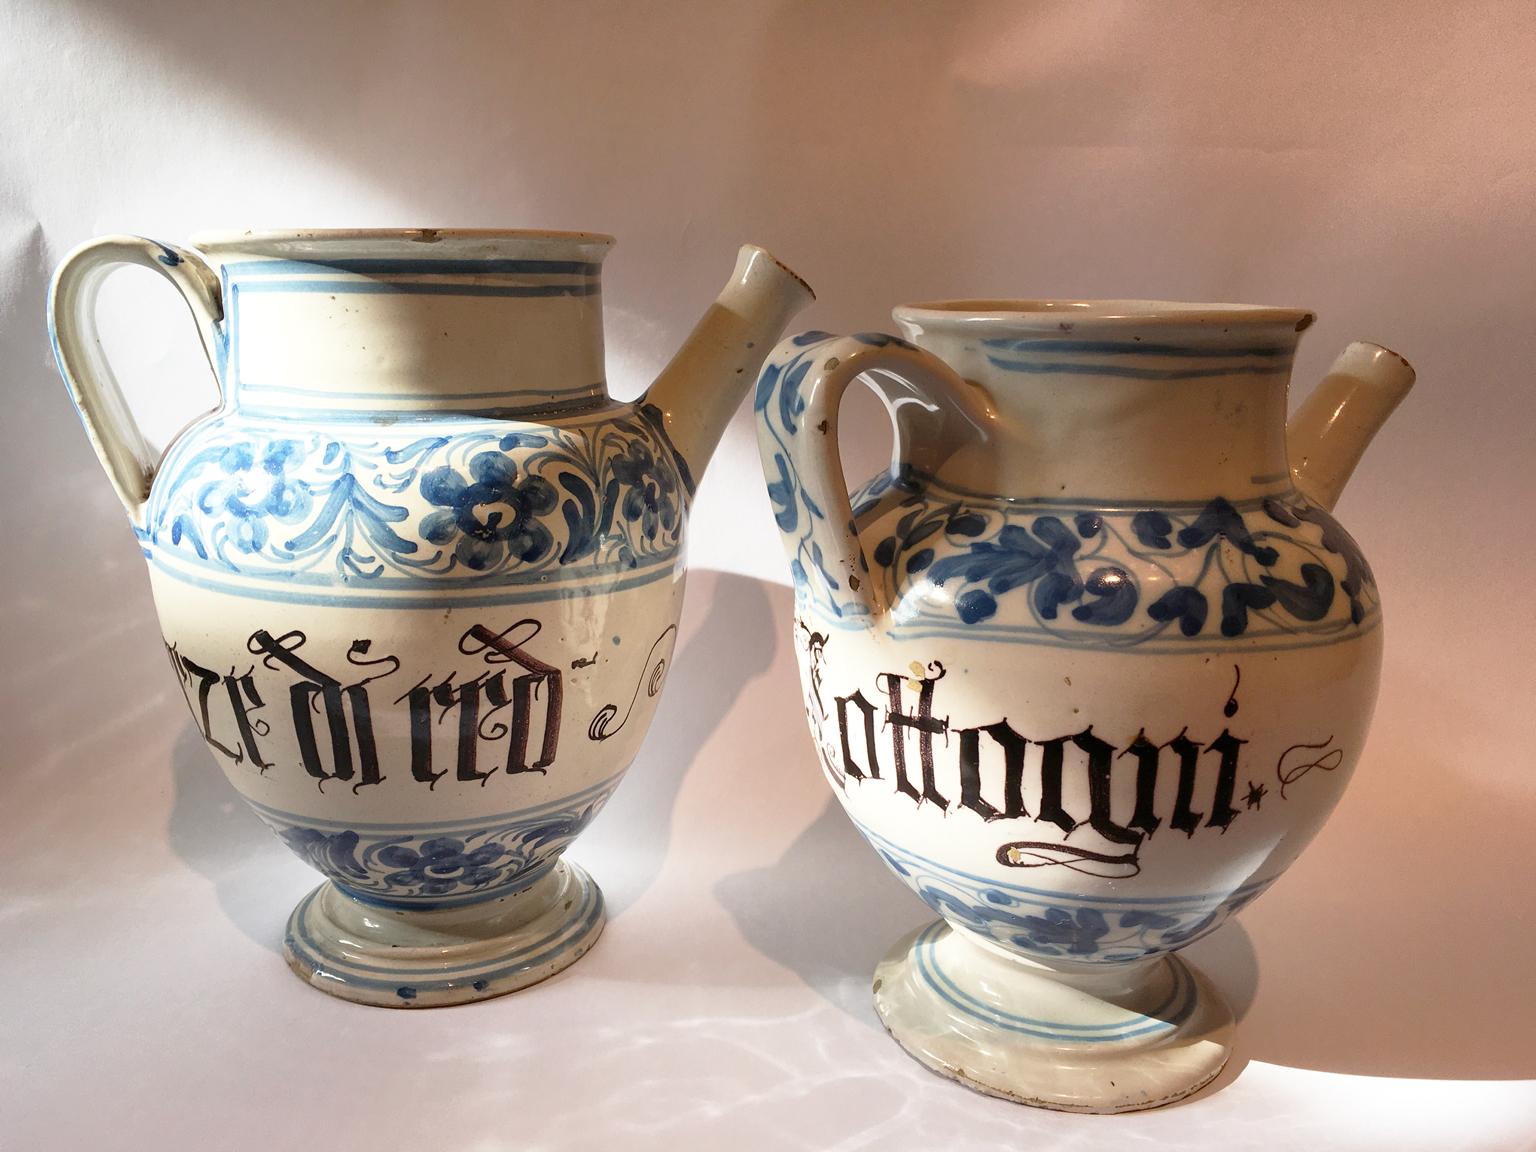 In the past, this pair of beautiful ceramics carafes, was utilized in a Pharmacy to contain erbs and spices infusions.
The carafes shows all signs of the time, but they remain a pair of decorative fascinating objects. Original from Eastern part of